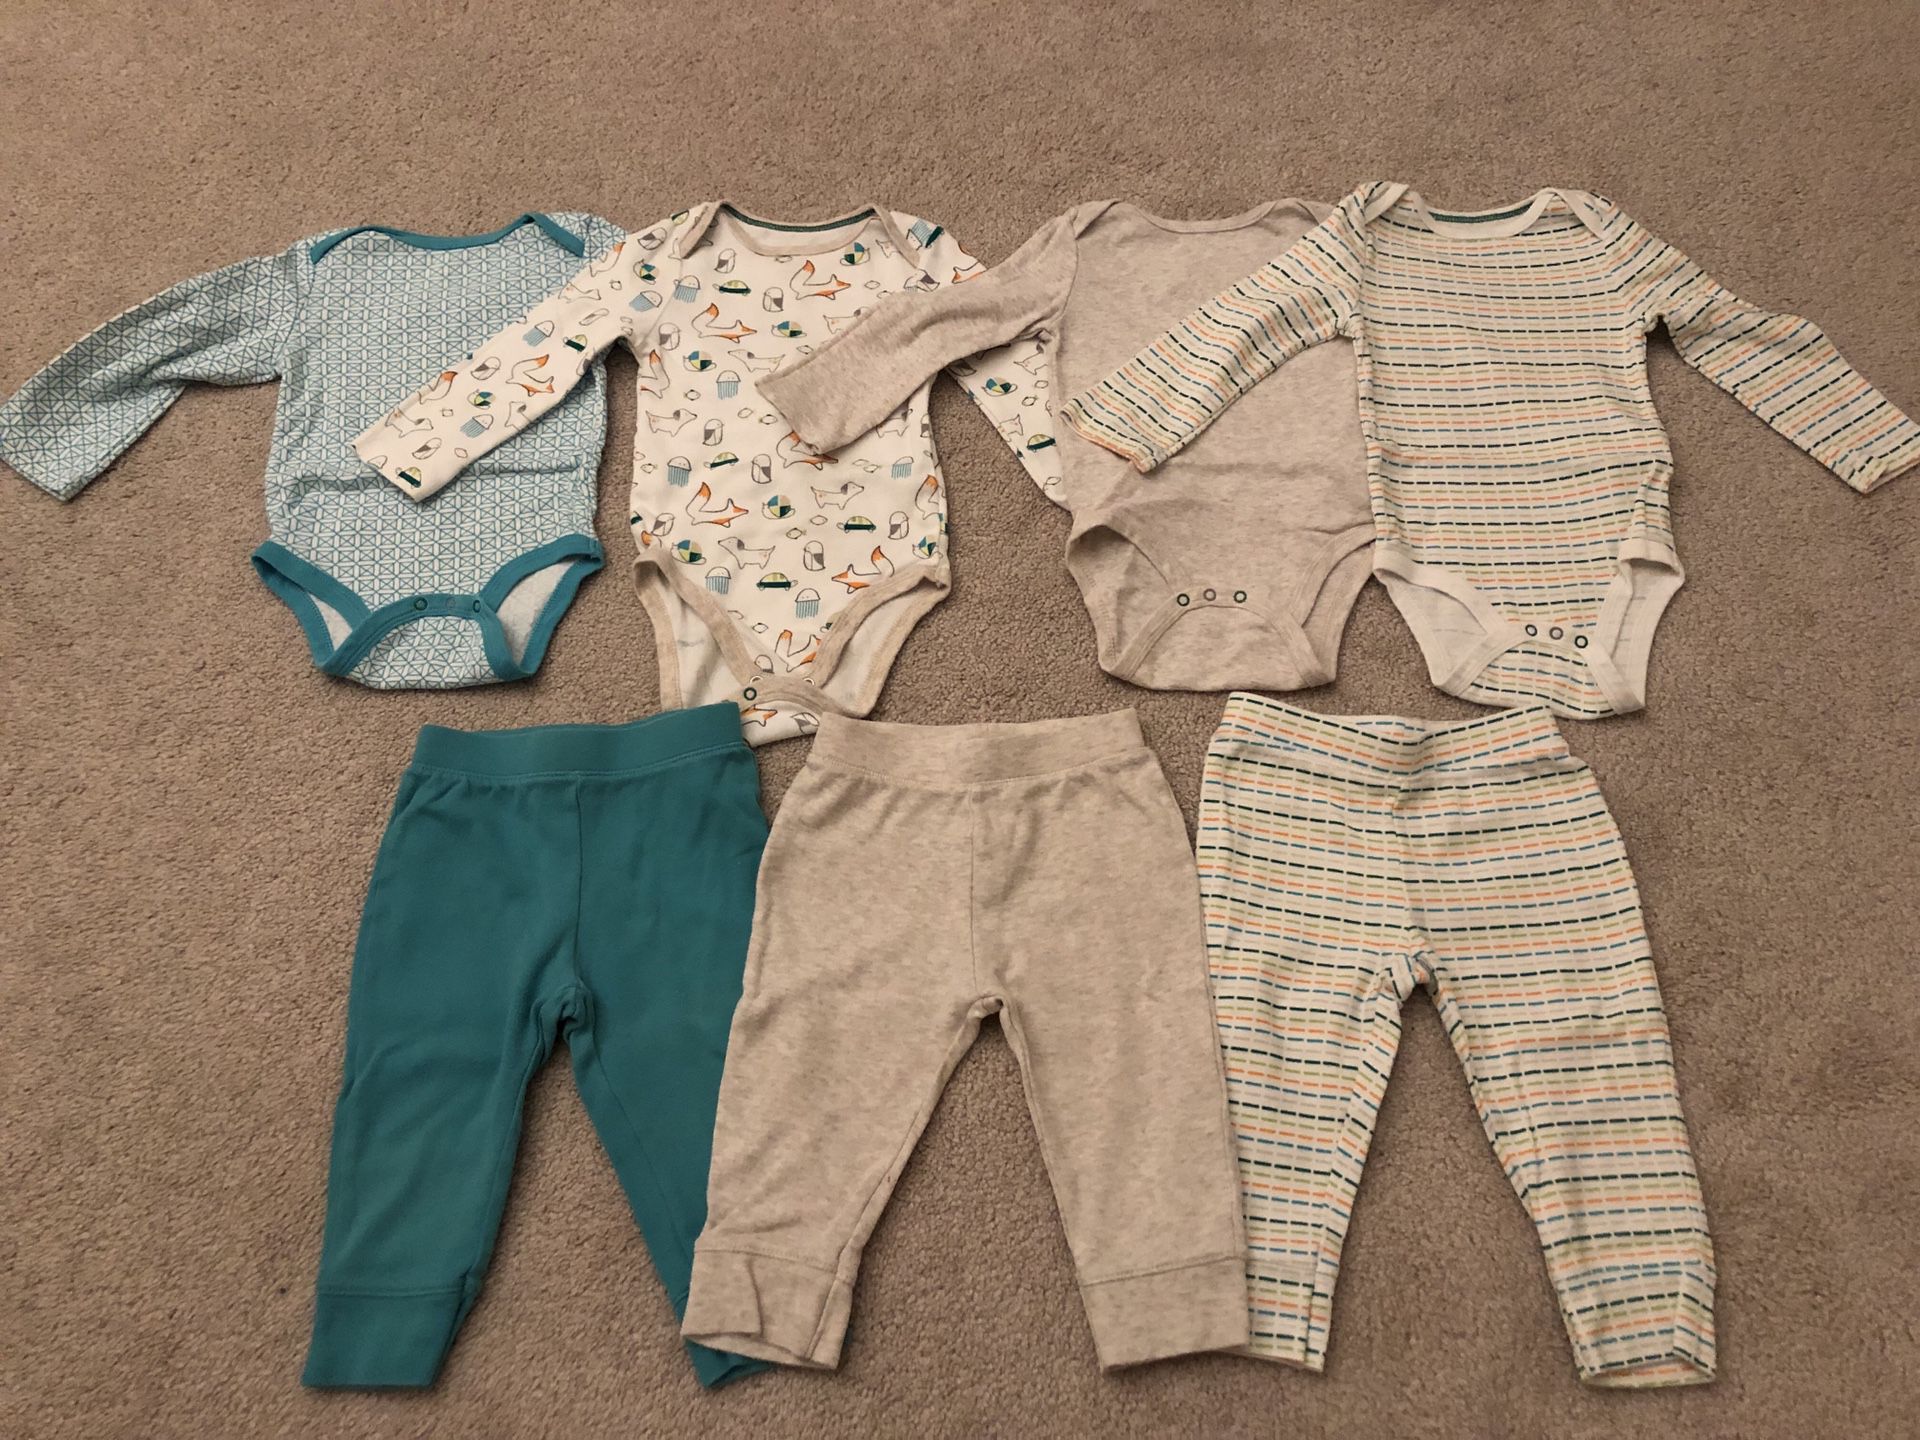 Baby clothes 12 months